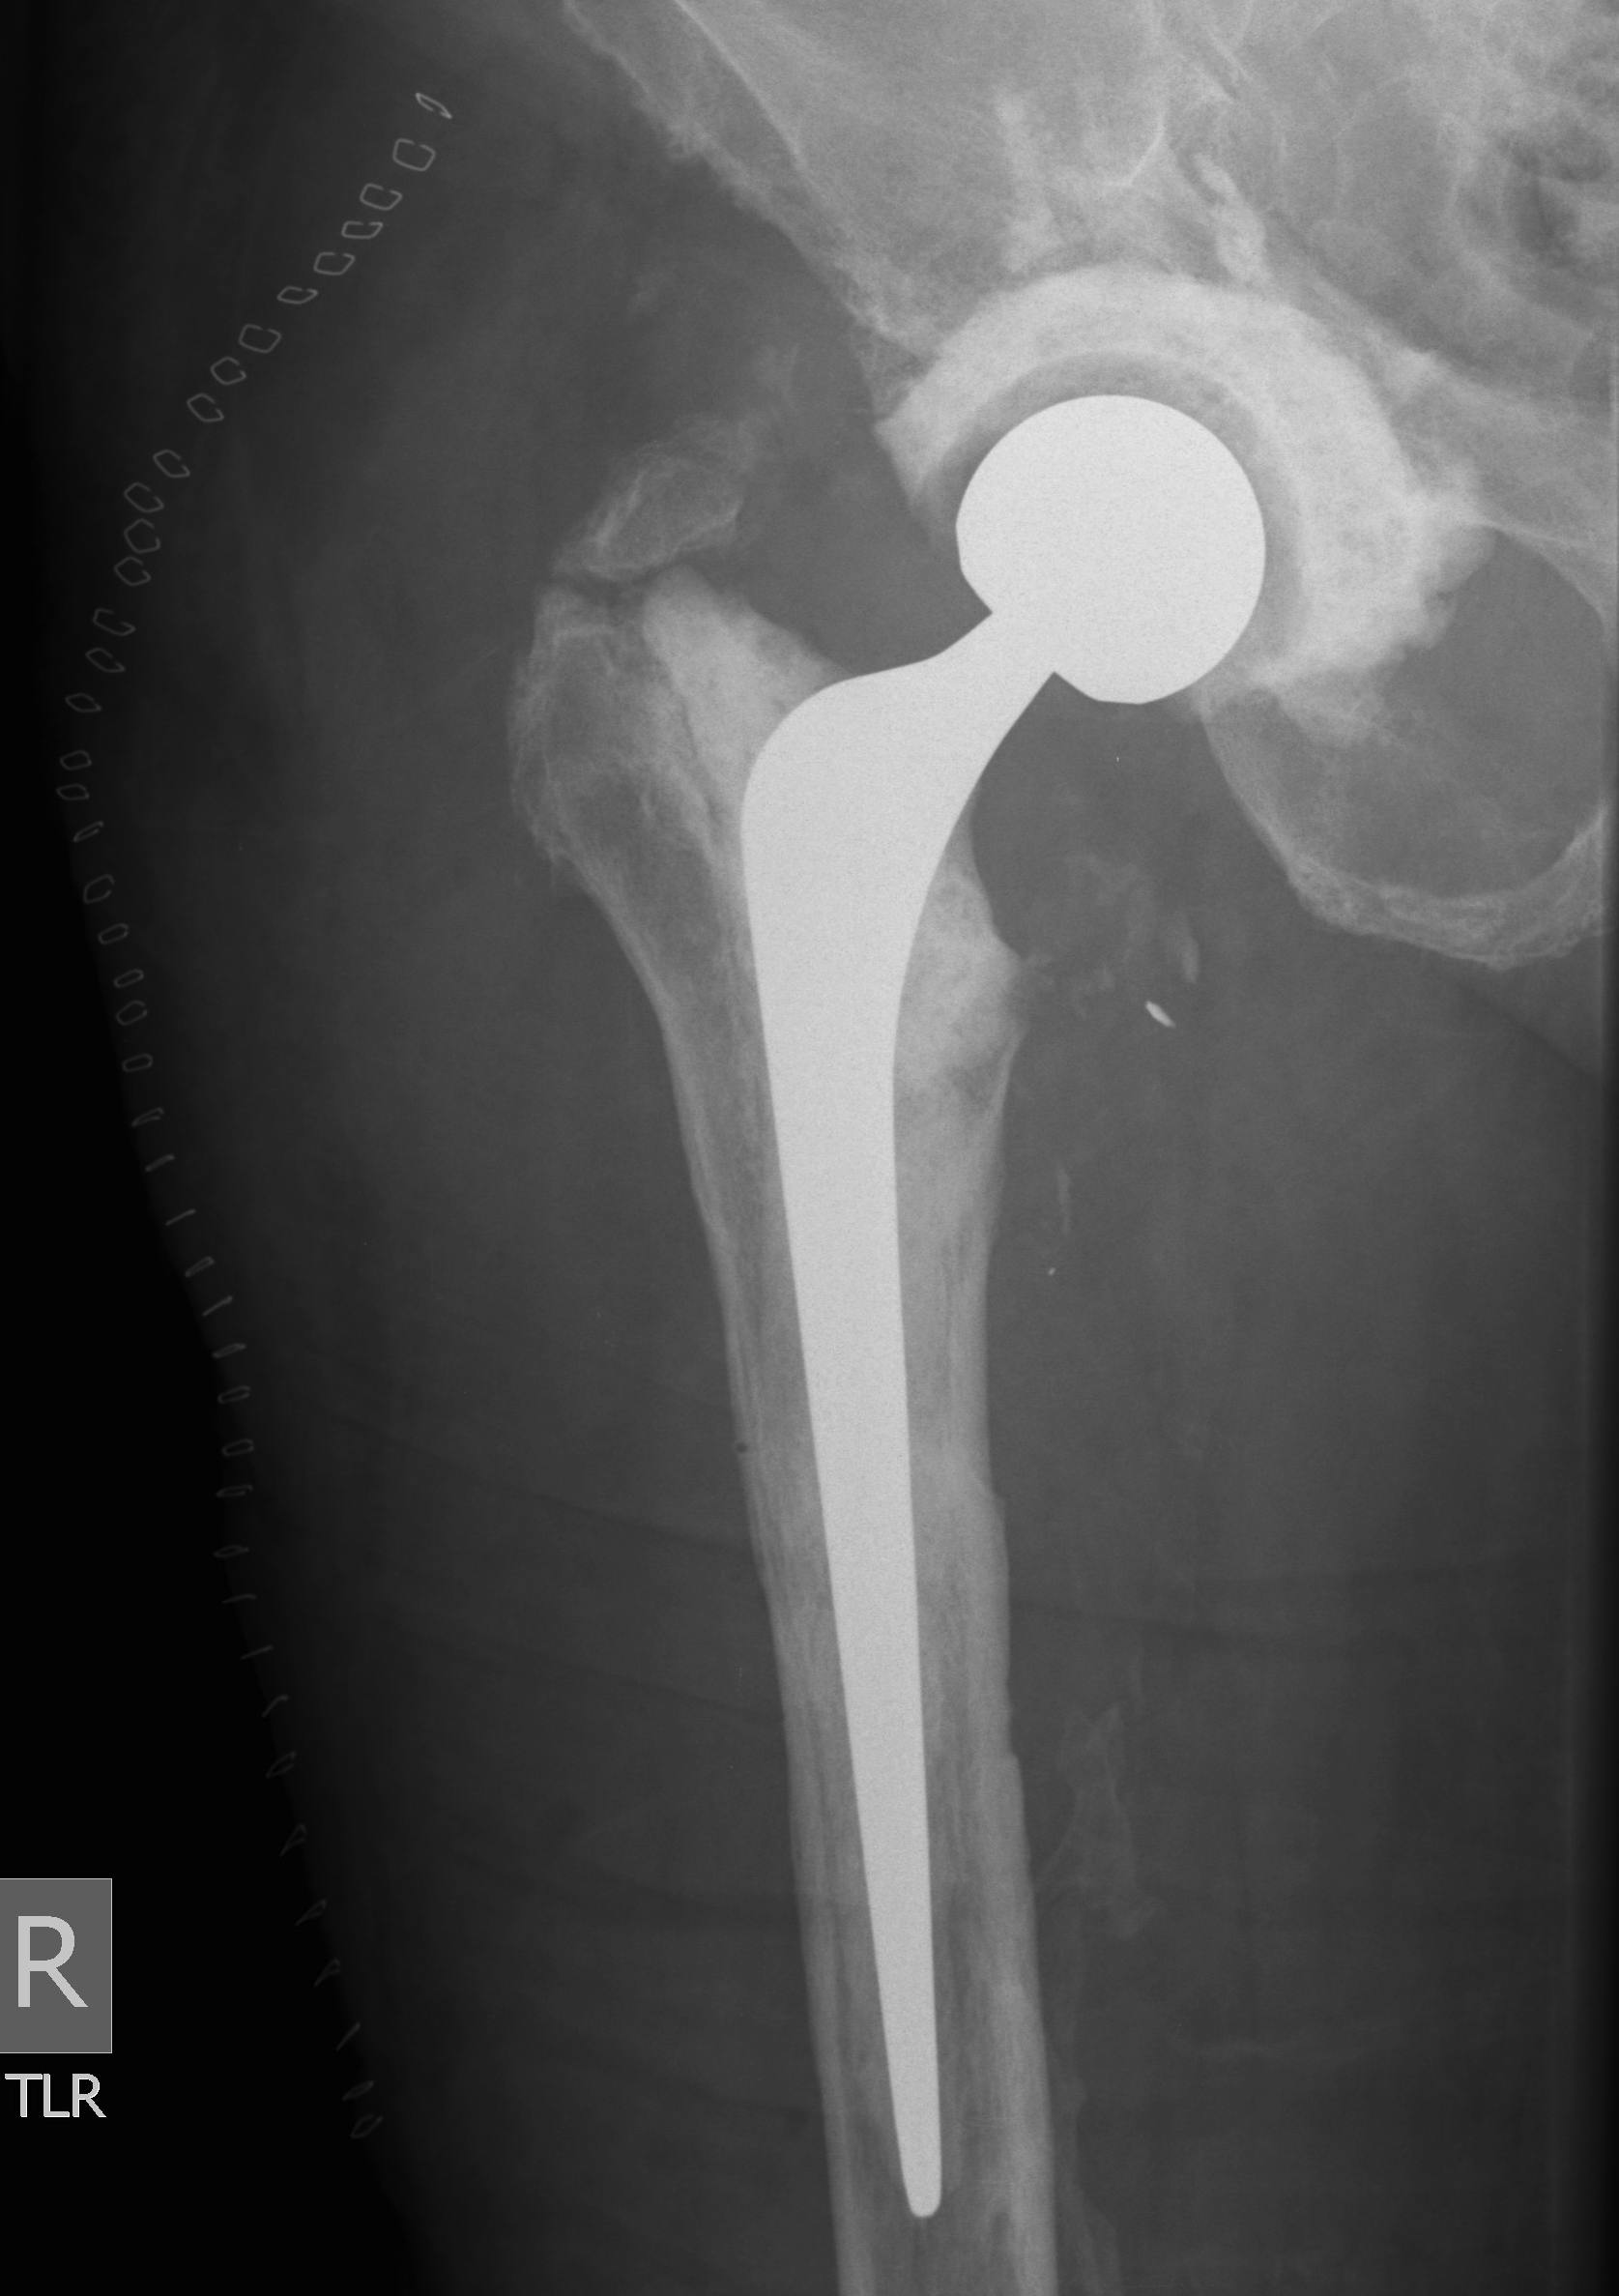 Infected THR Kiwi Hip Spacer